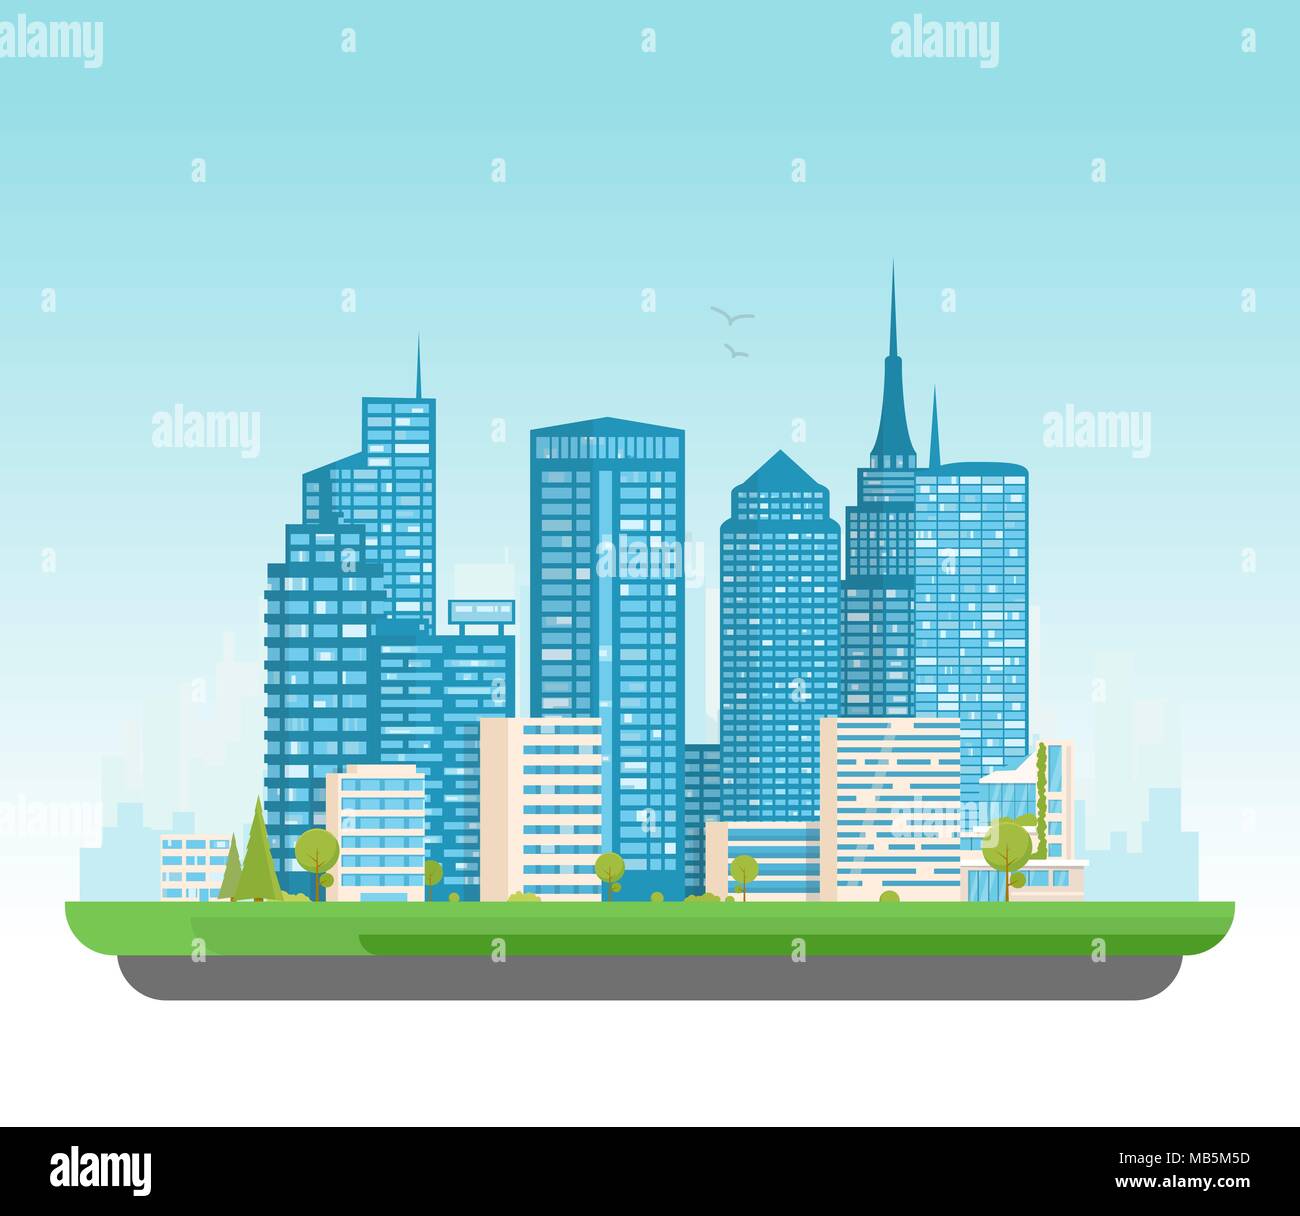 City buildings vector illustration. Small building, big skyscrapers and large city tall skyscrapers on background. Urban street with park and trees ne Stock Vector